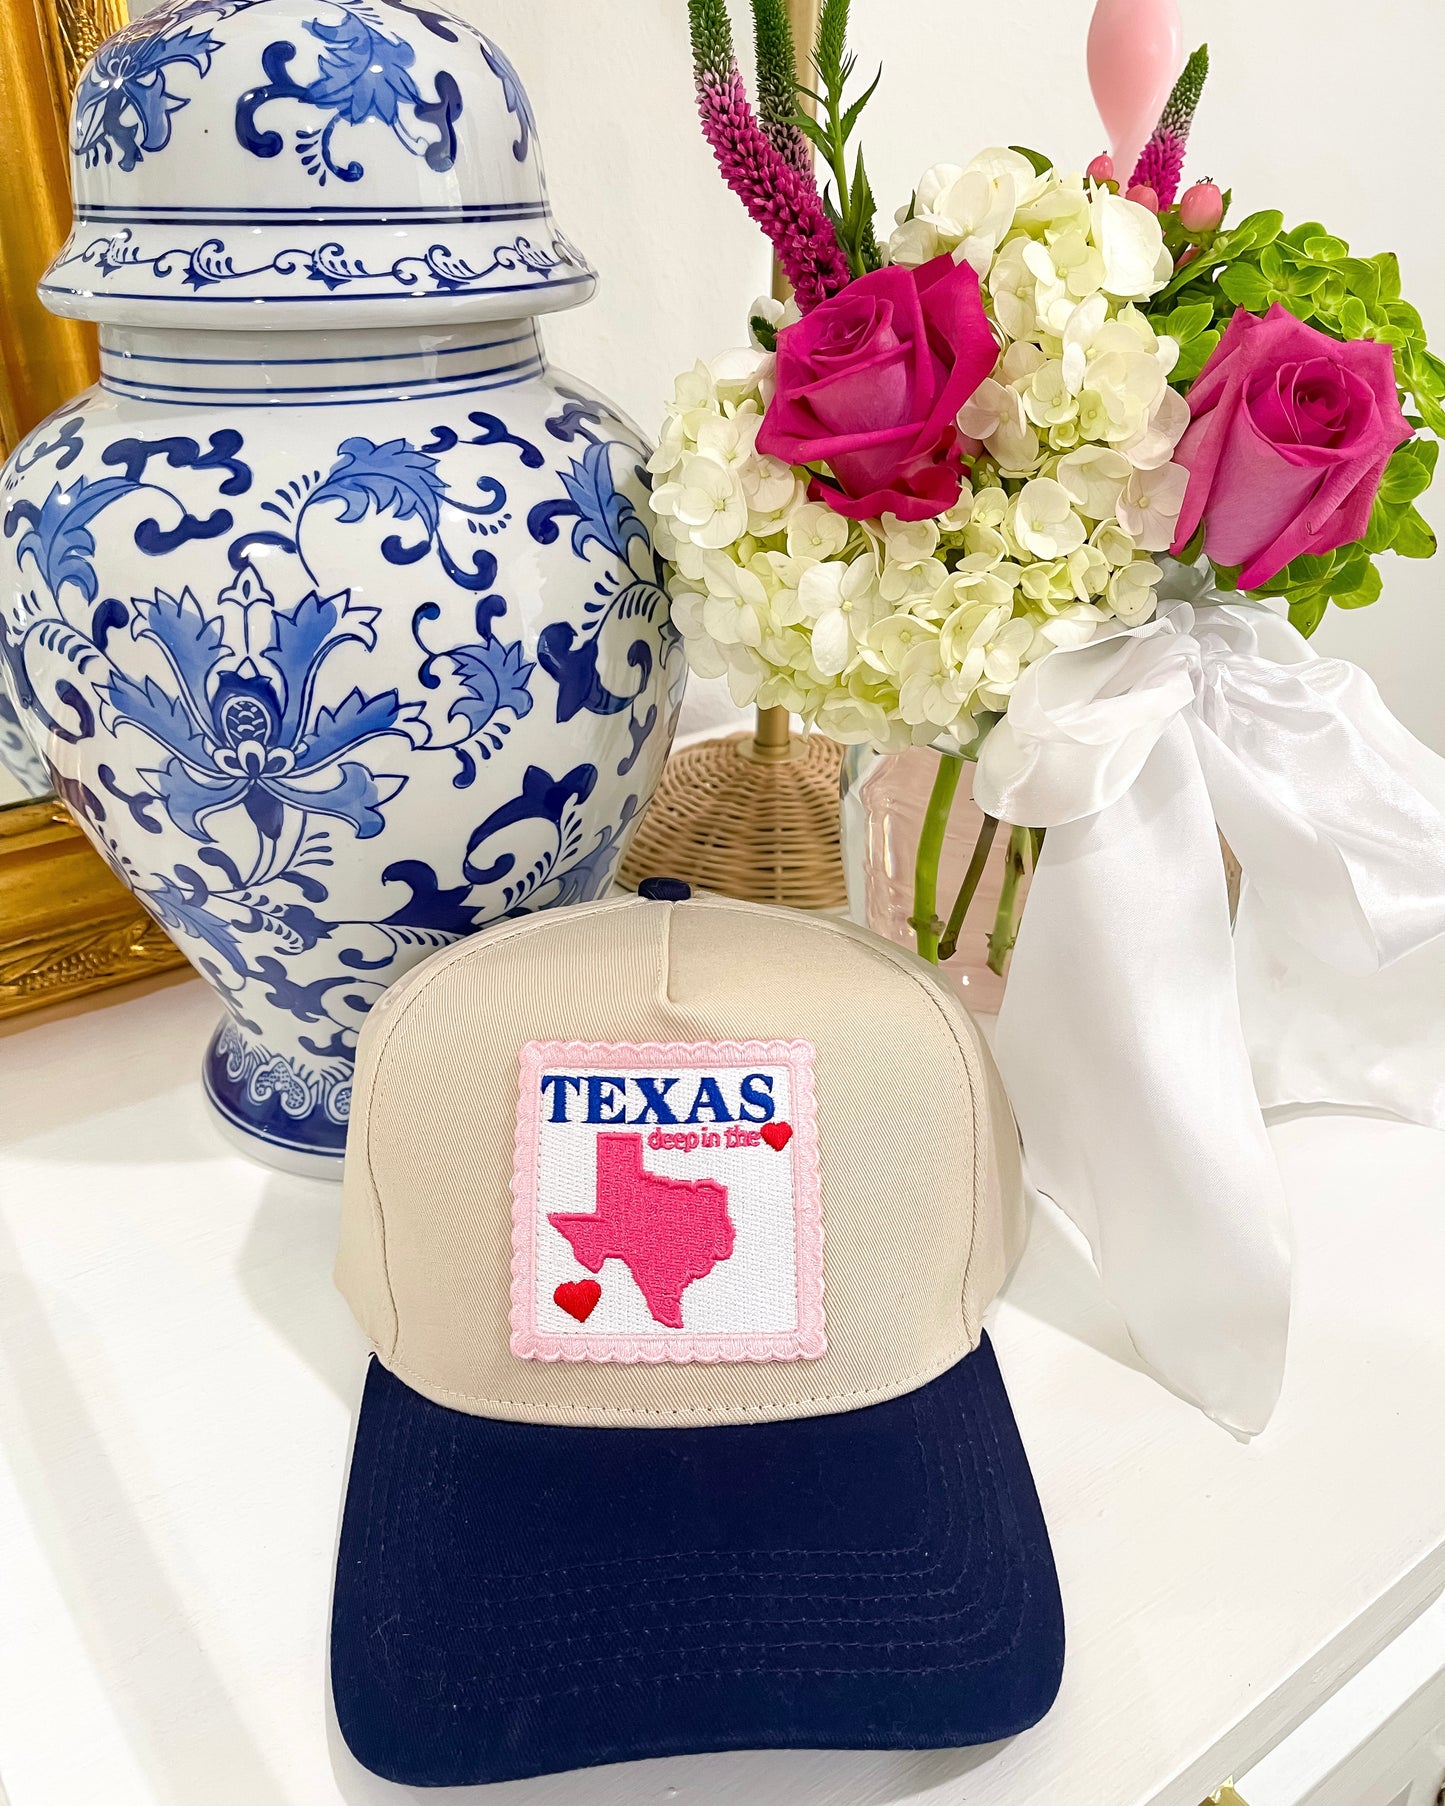 TEXAS, deep in the <3 Hat